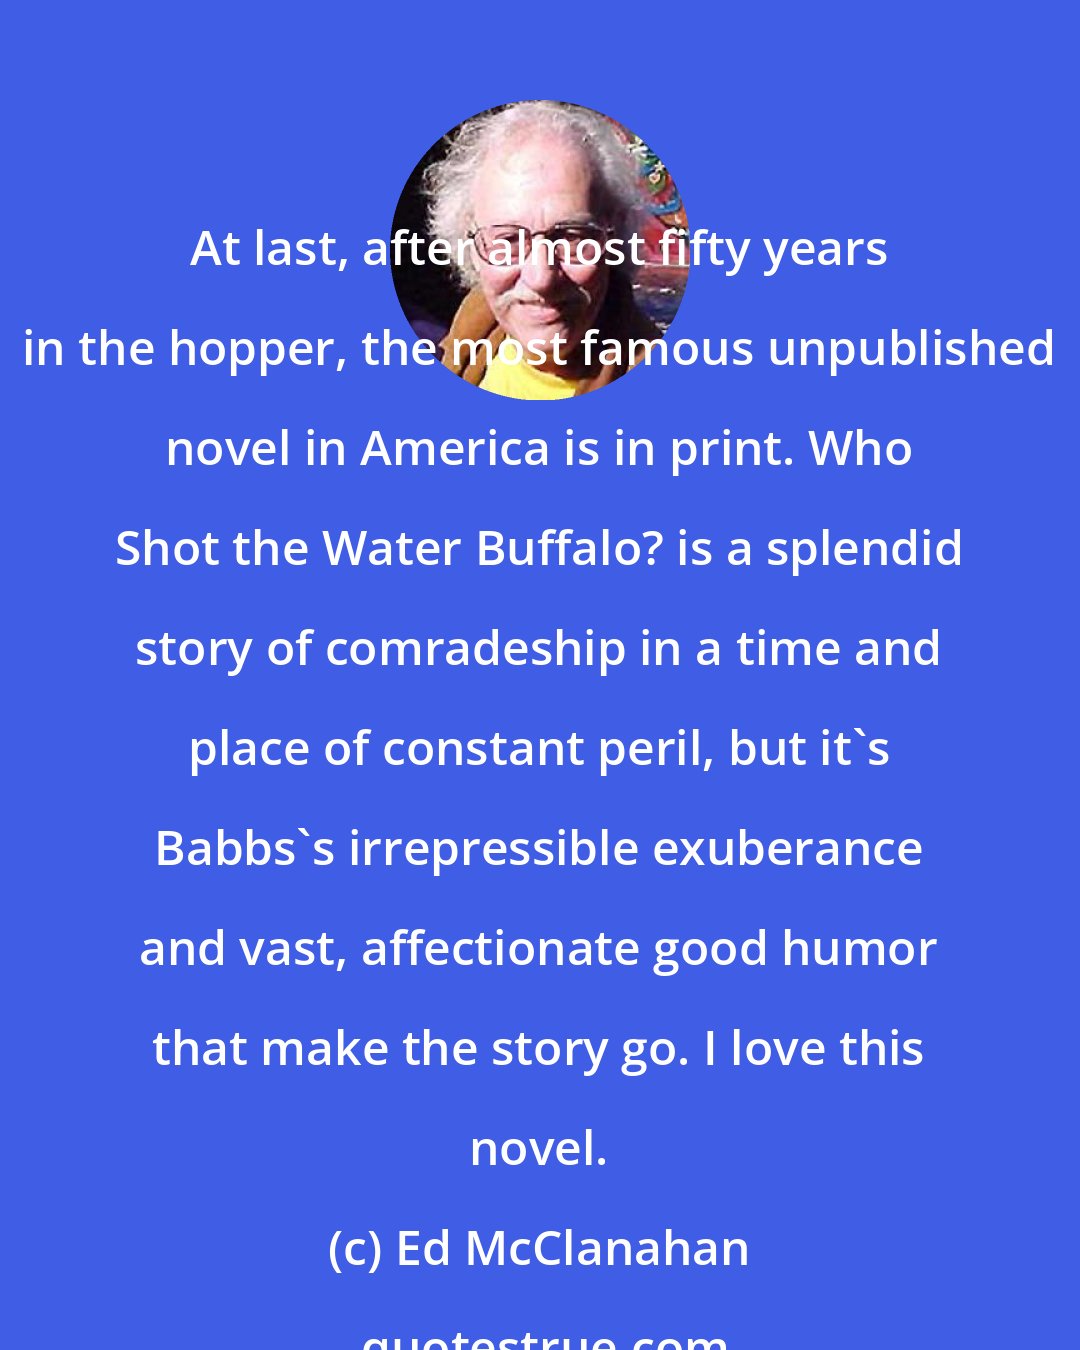 Ed McClanahan: At last, after almost fifty years in the hopper, the most famous unpublished novel in America is in print. Who Shot the Water Buffalo? is a splendid story of comradeship in a time and place of constant peril, but it's Babbs's irrepressible exuberance and vast, affectionate good humor that make the story go. I love this novel.